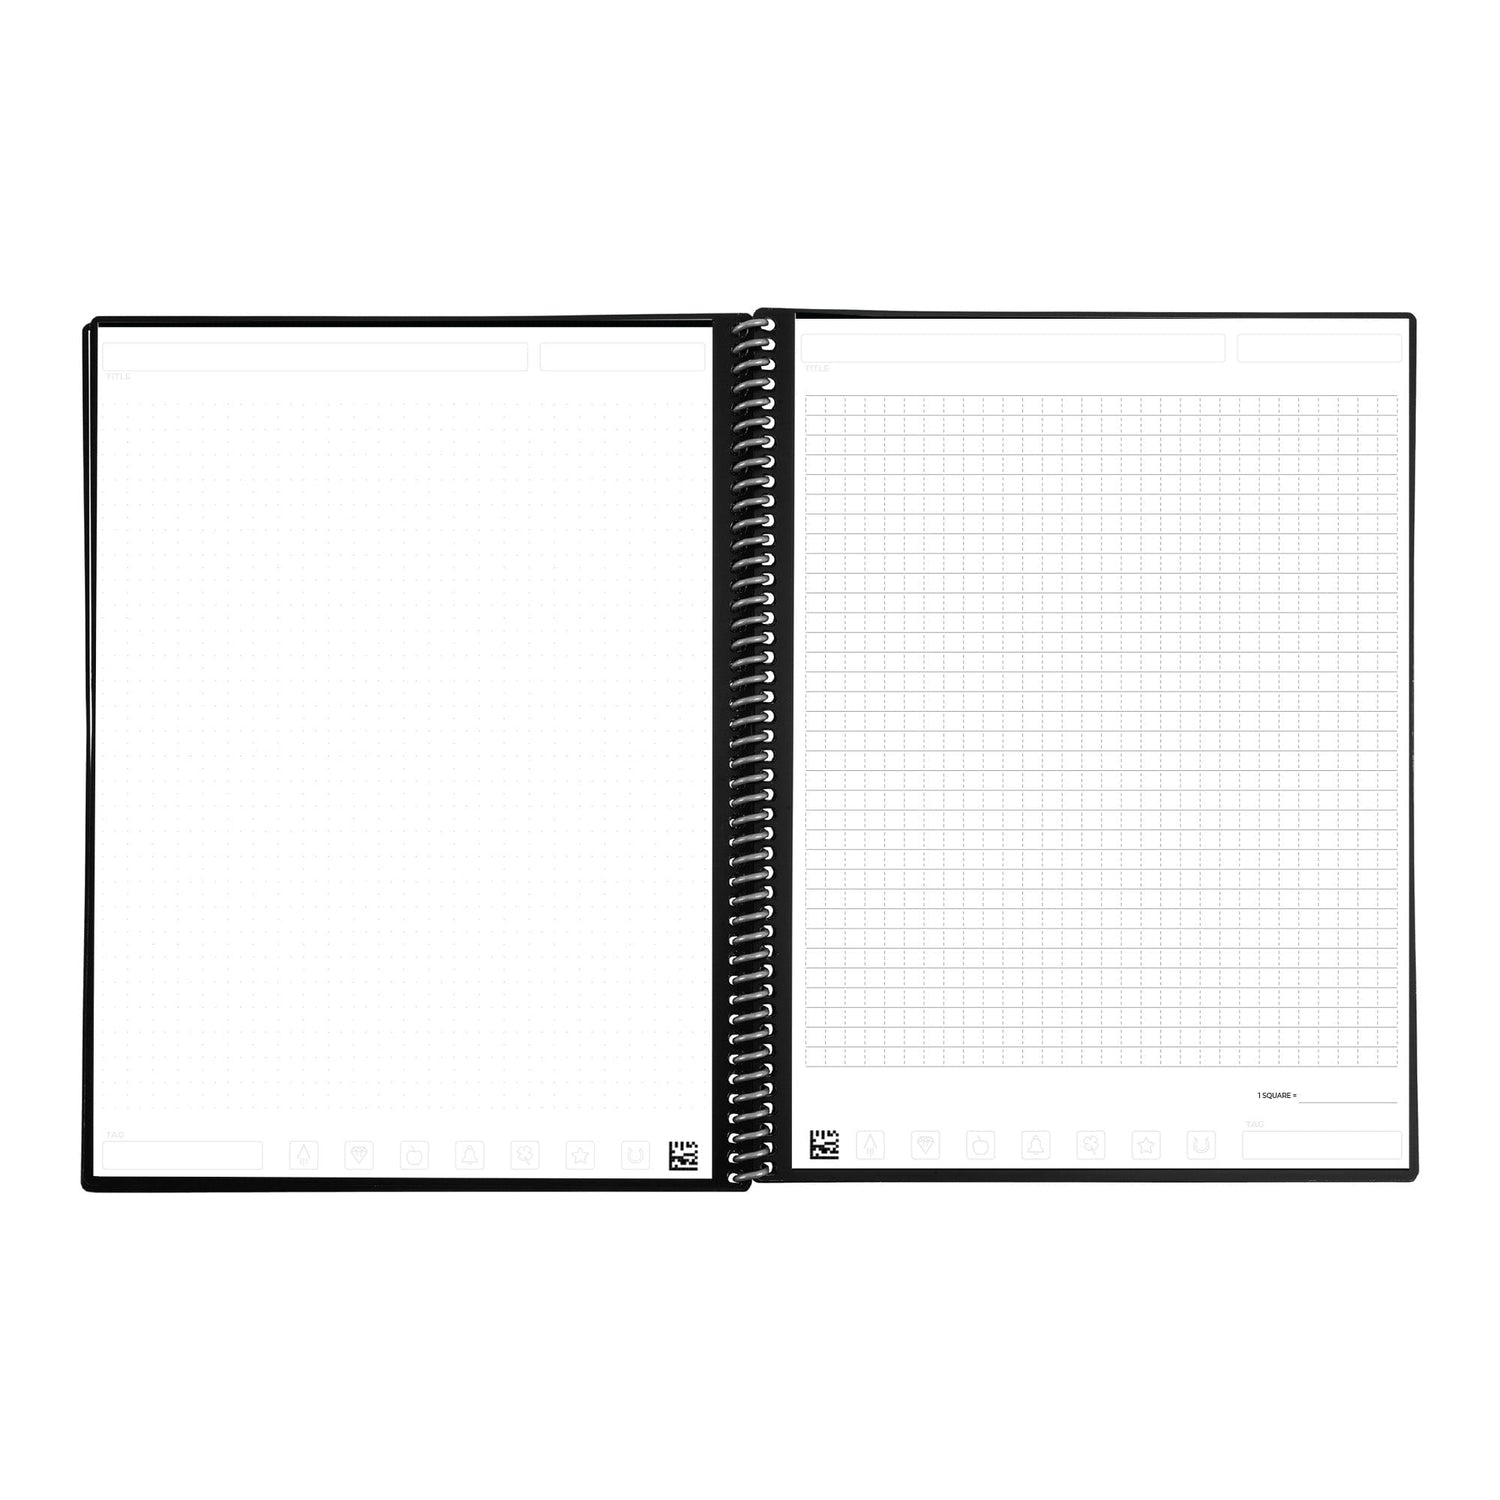 A dot grid page and a graph page